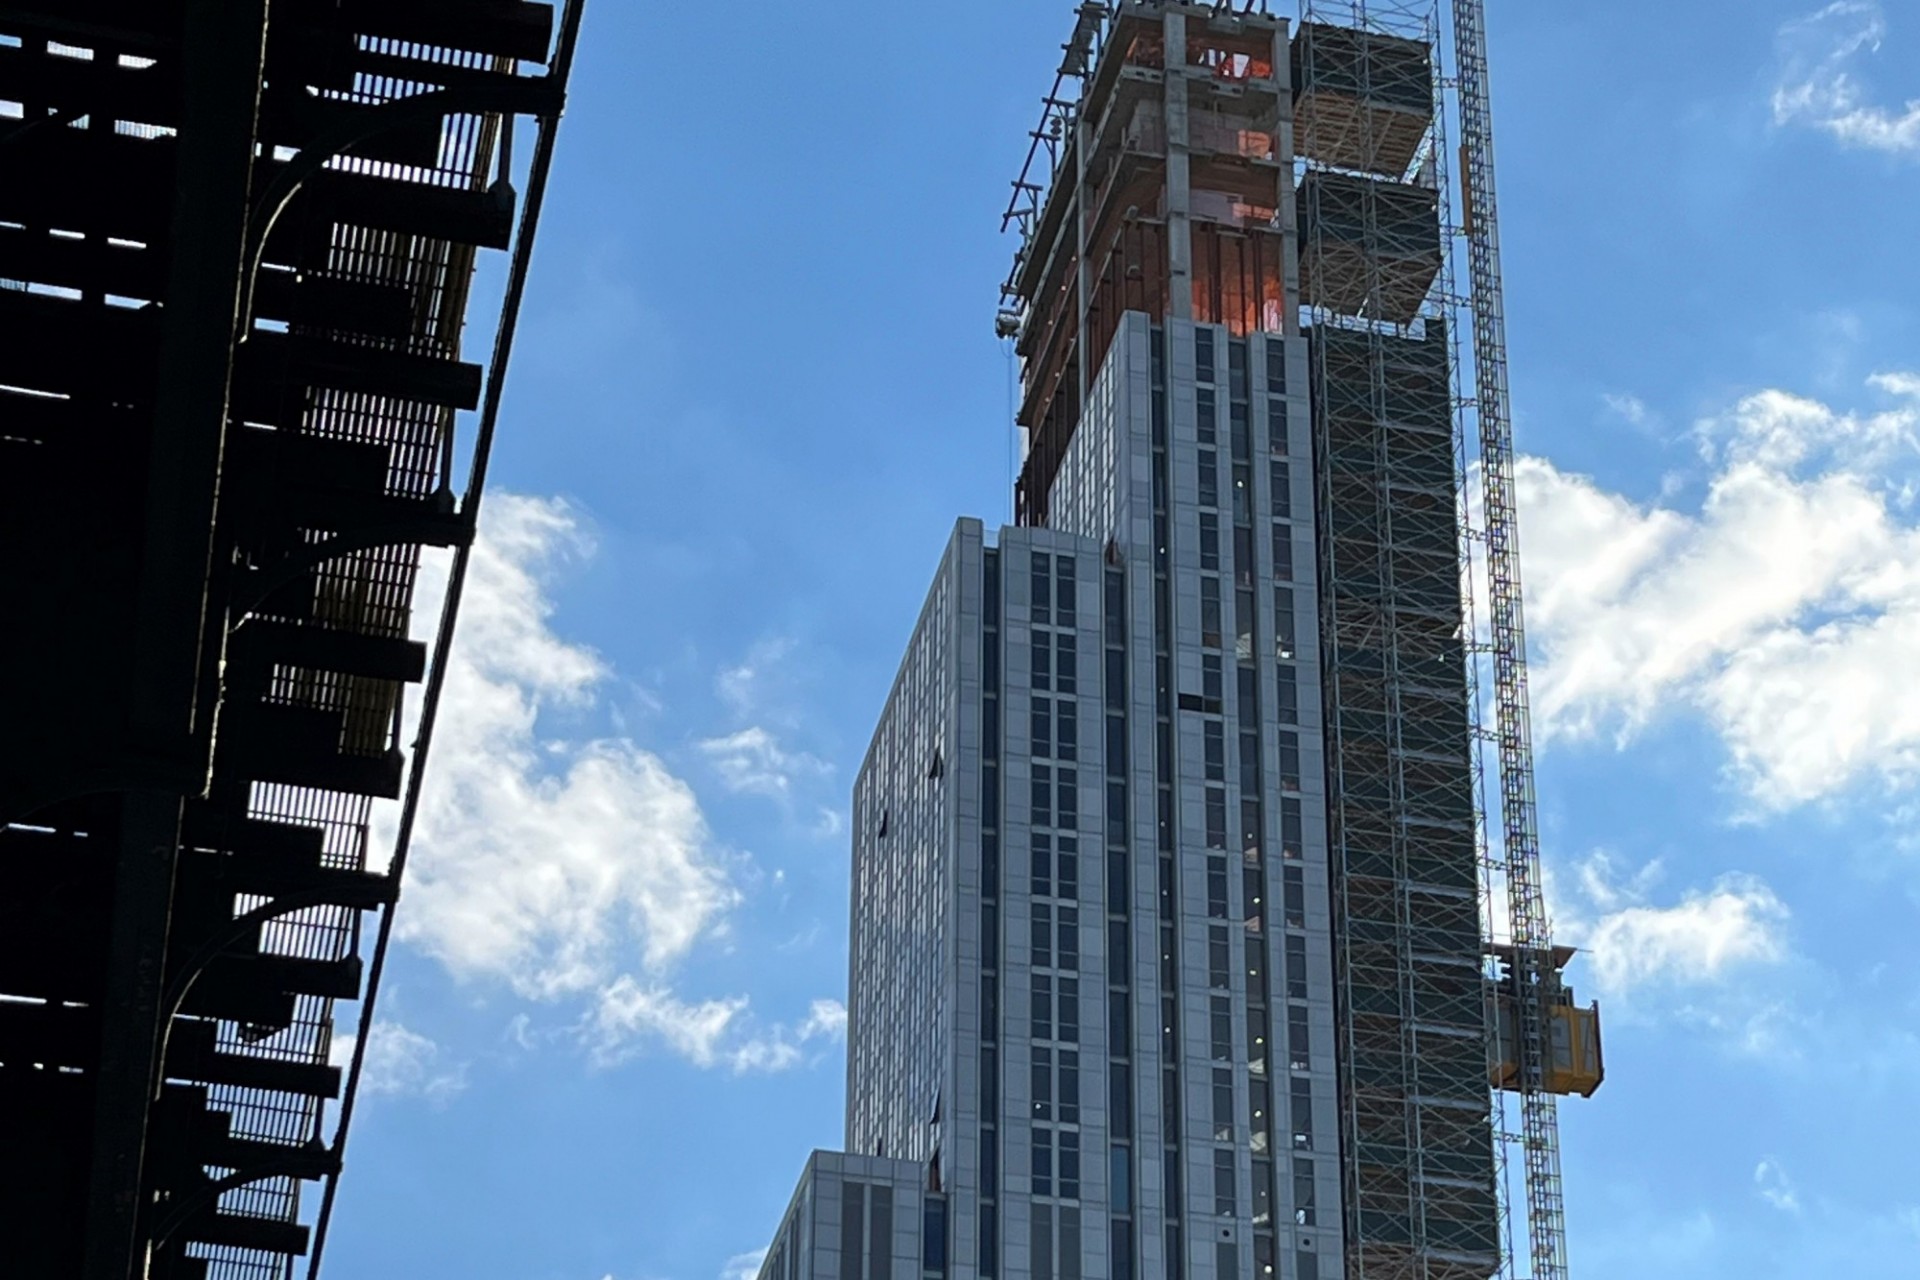 A view of the 600 W. 125th Street building that's currently under construction, looking south.